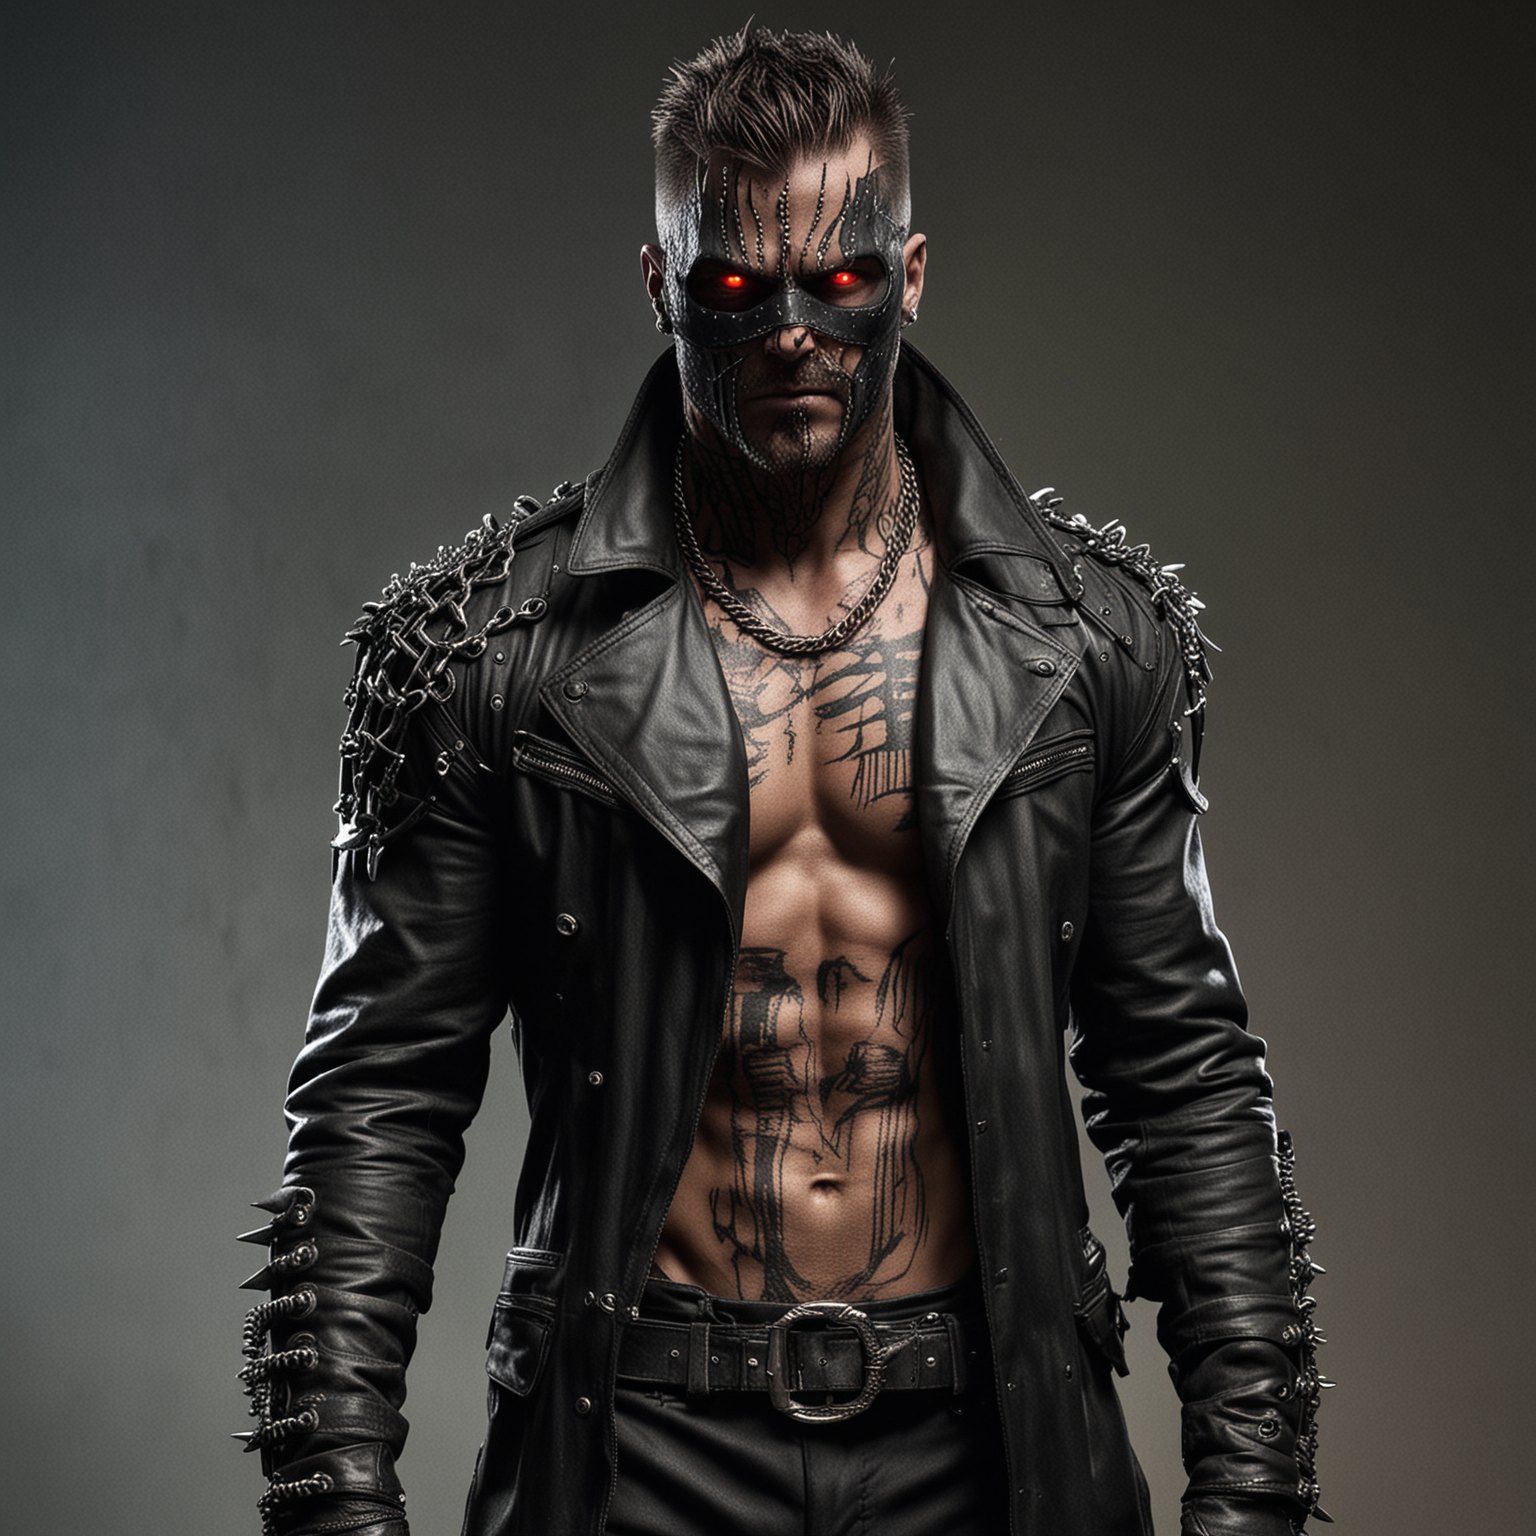 Ravage is a towering figure, standing at around 6'5" with a muscular build. His attire consists of a rugged leather trench coat adorned with metal studs and chains, giving him a menacing appearance. His face is partially covered by a metal mask, with glowing red eyes peering out from the darkness. He exudes an aura of intimidation and brutality, with scars and tattoos visible on his exposed skin.